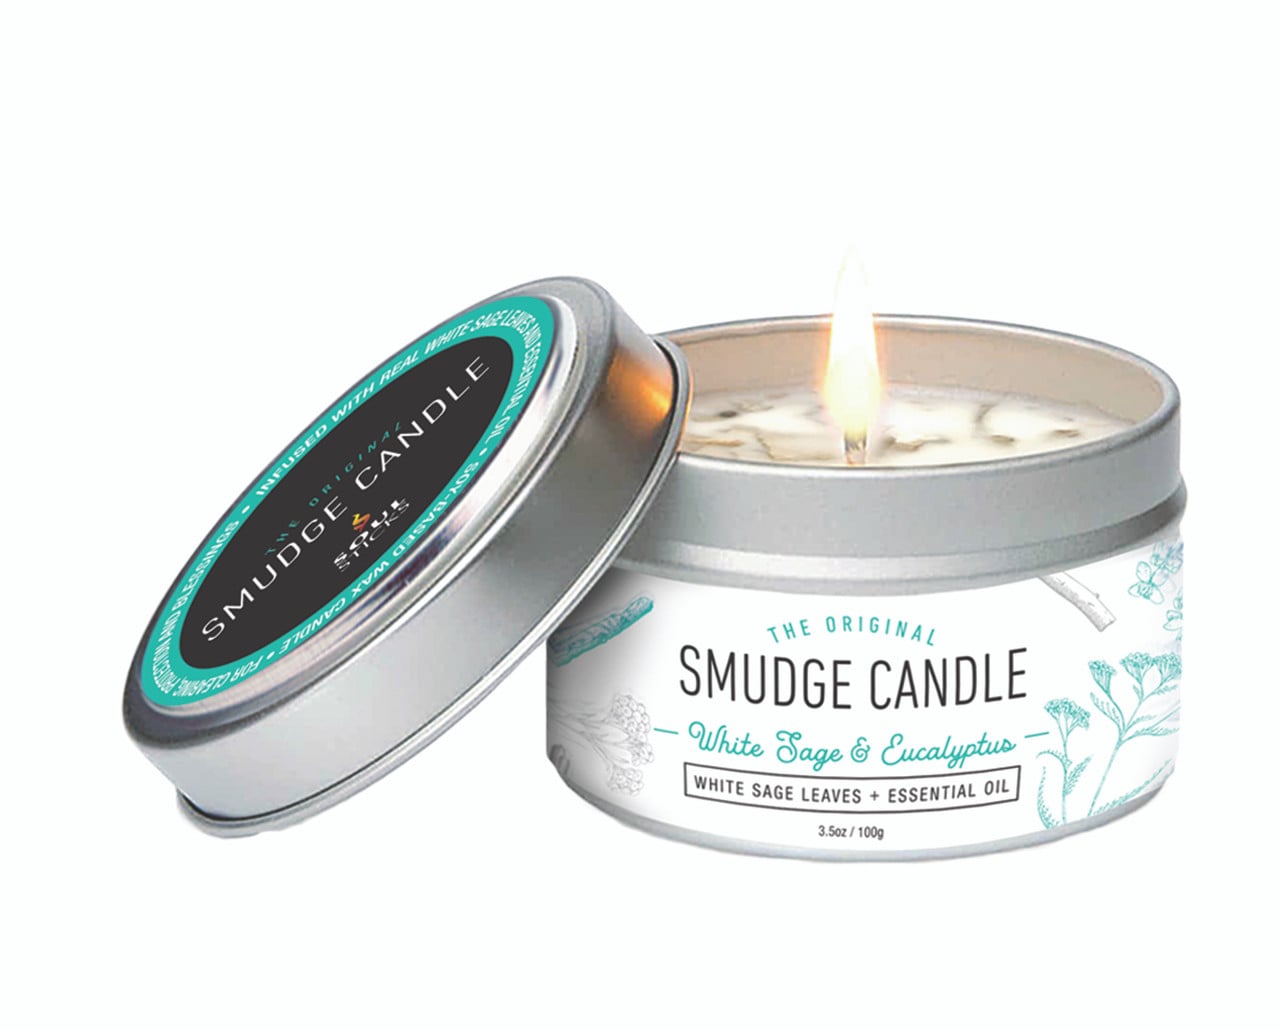 Smudge Candle 5 Scents Available